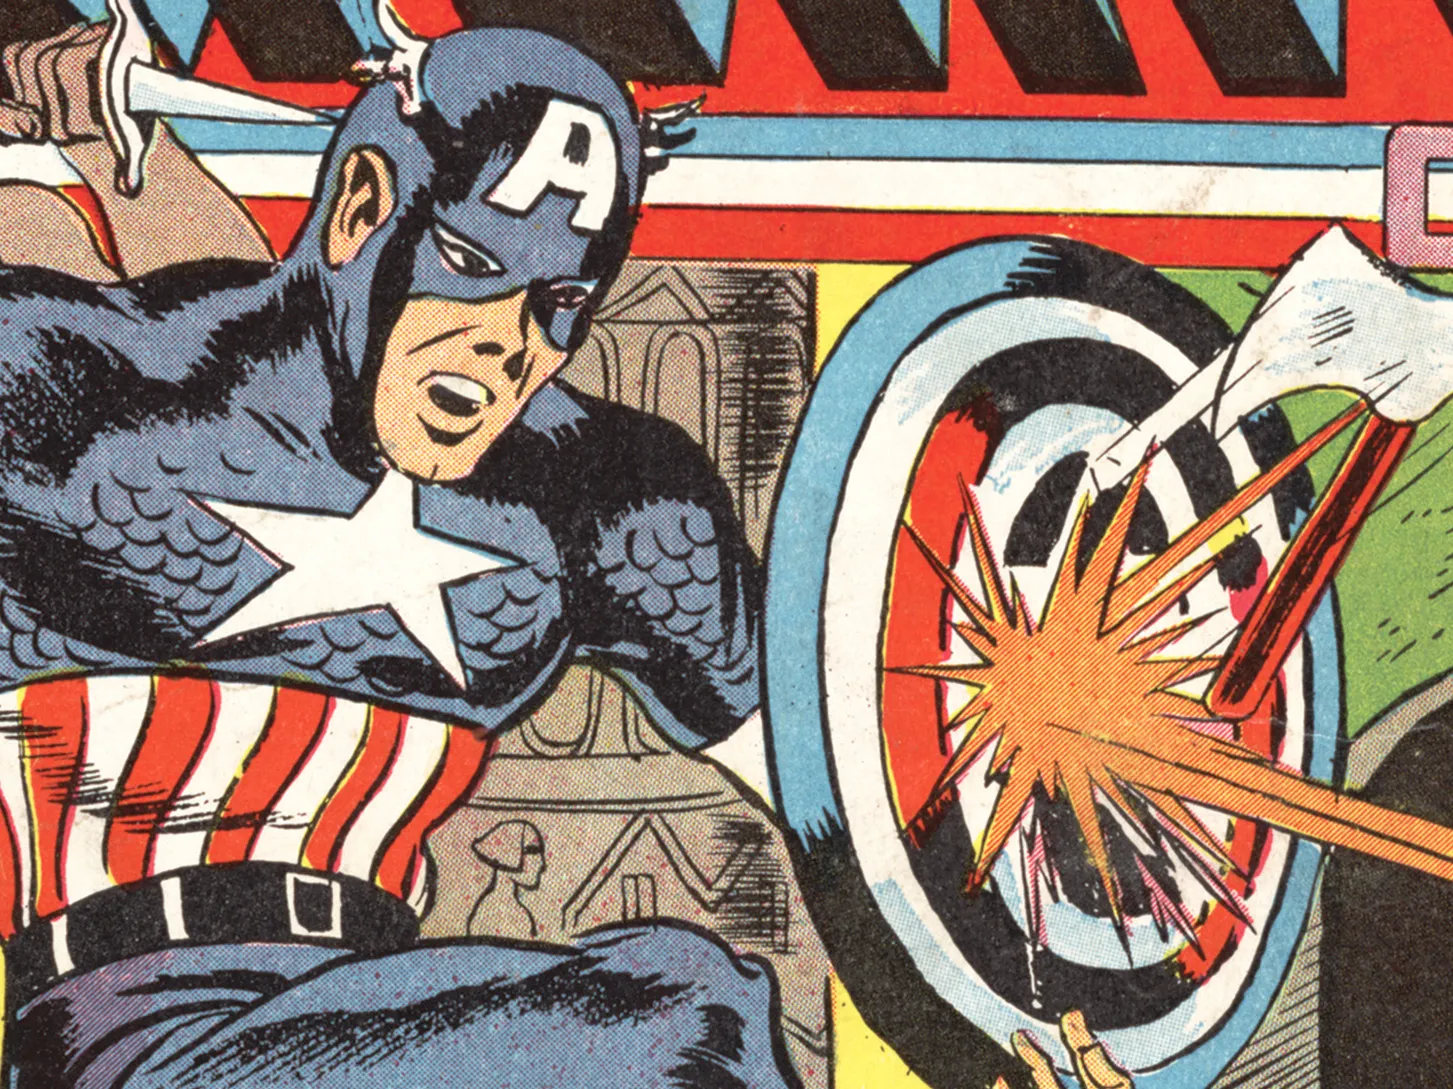 IN a detail from a comic book cover: A hand-drawn Captain America, wearing a red, white and blue suit that covers the top half of his face to hide his identity, holds up his shield to block an attack that makes short rays blast in all directions.